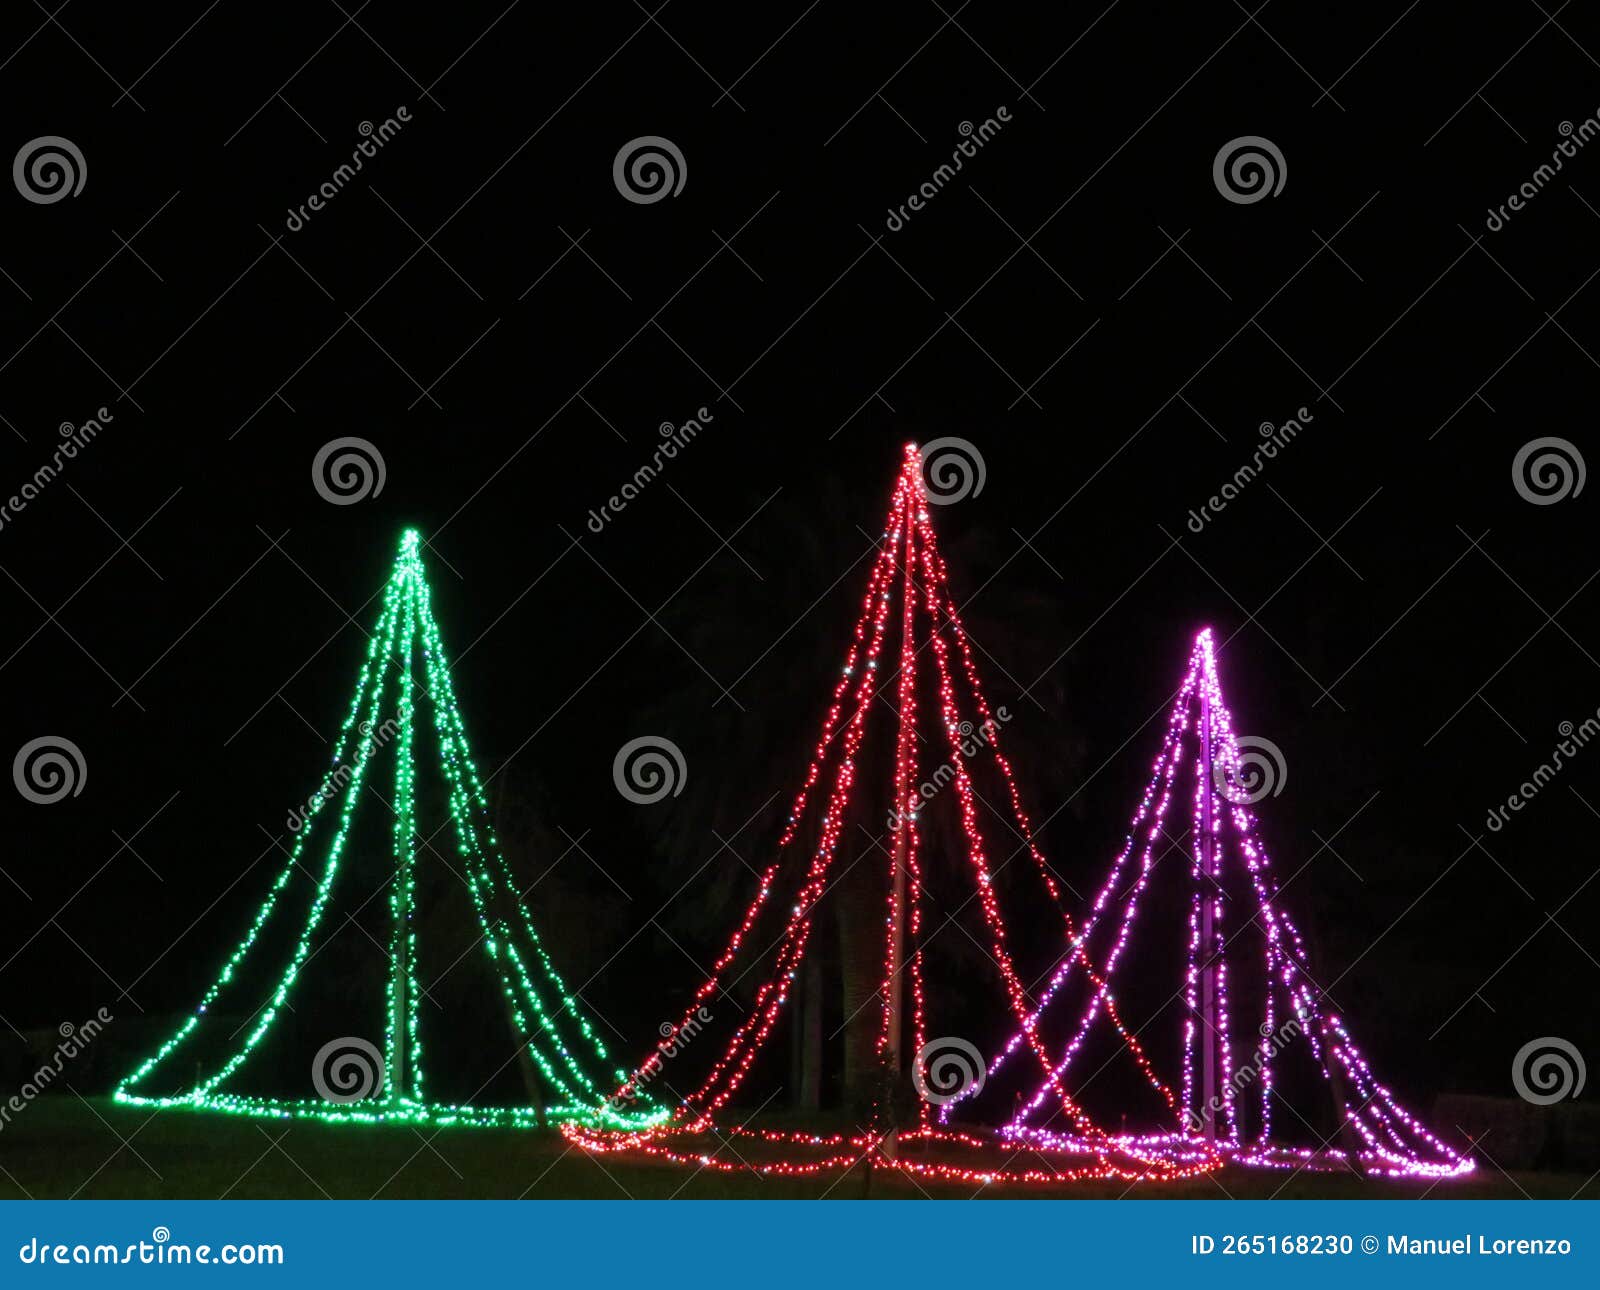 christmas trees illuminated with colored bulbs happiness illusion party